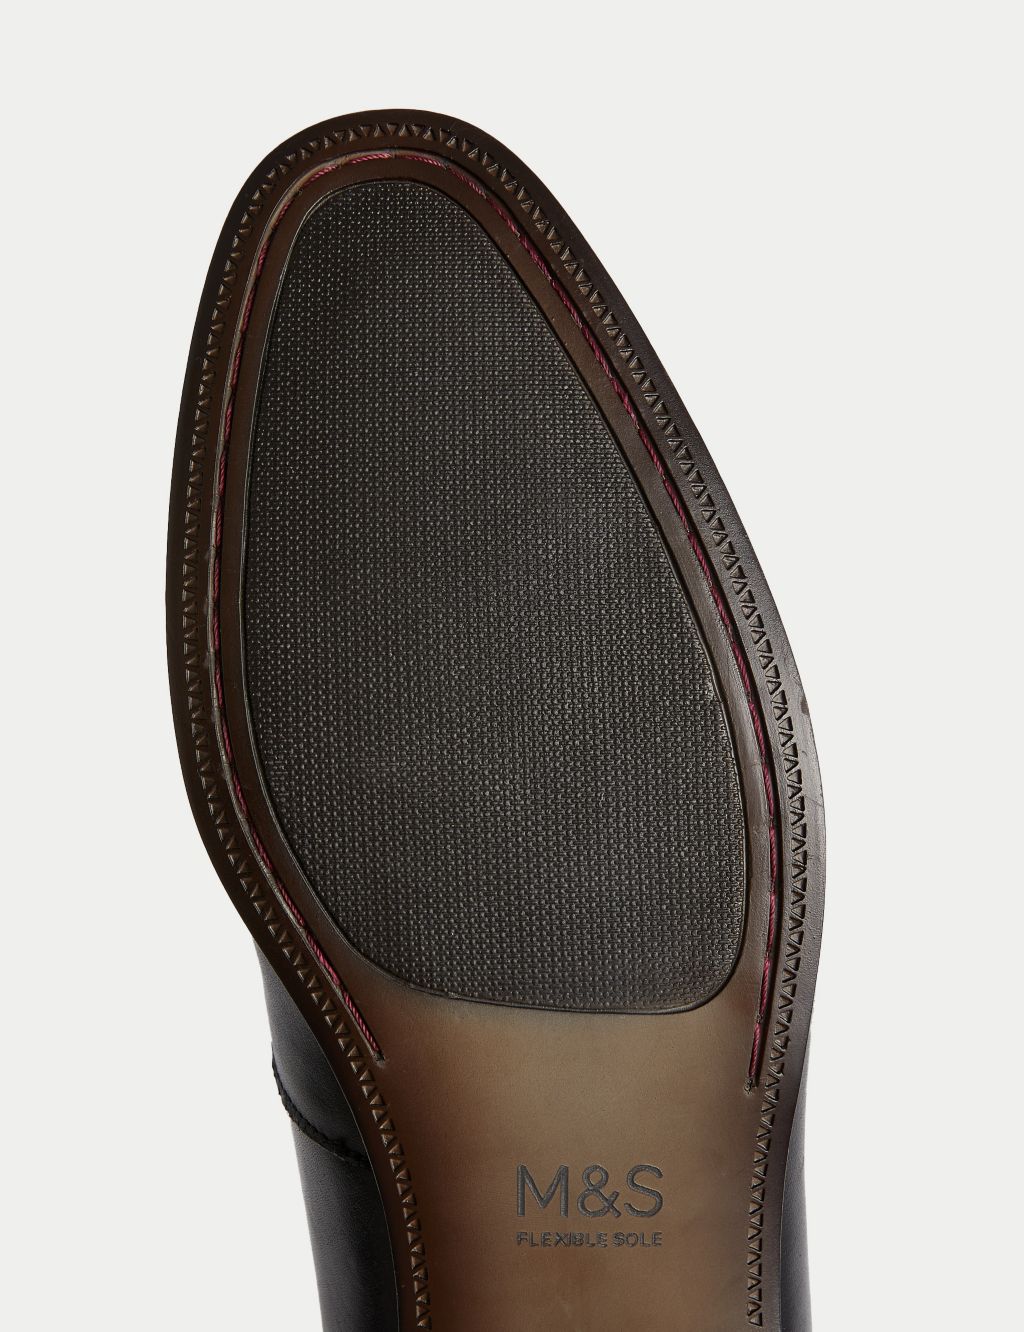 Leather Slip-On Loafers image 4